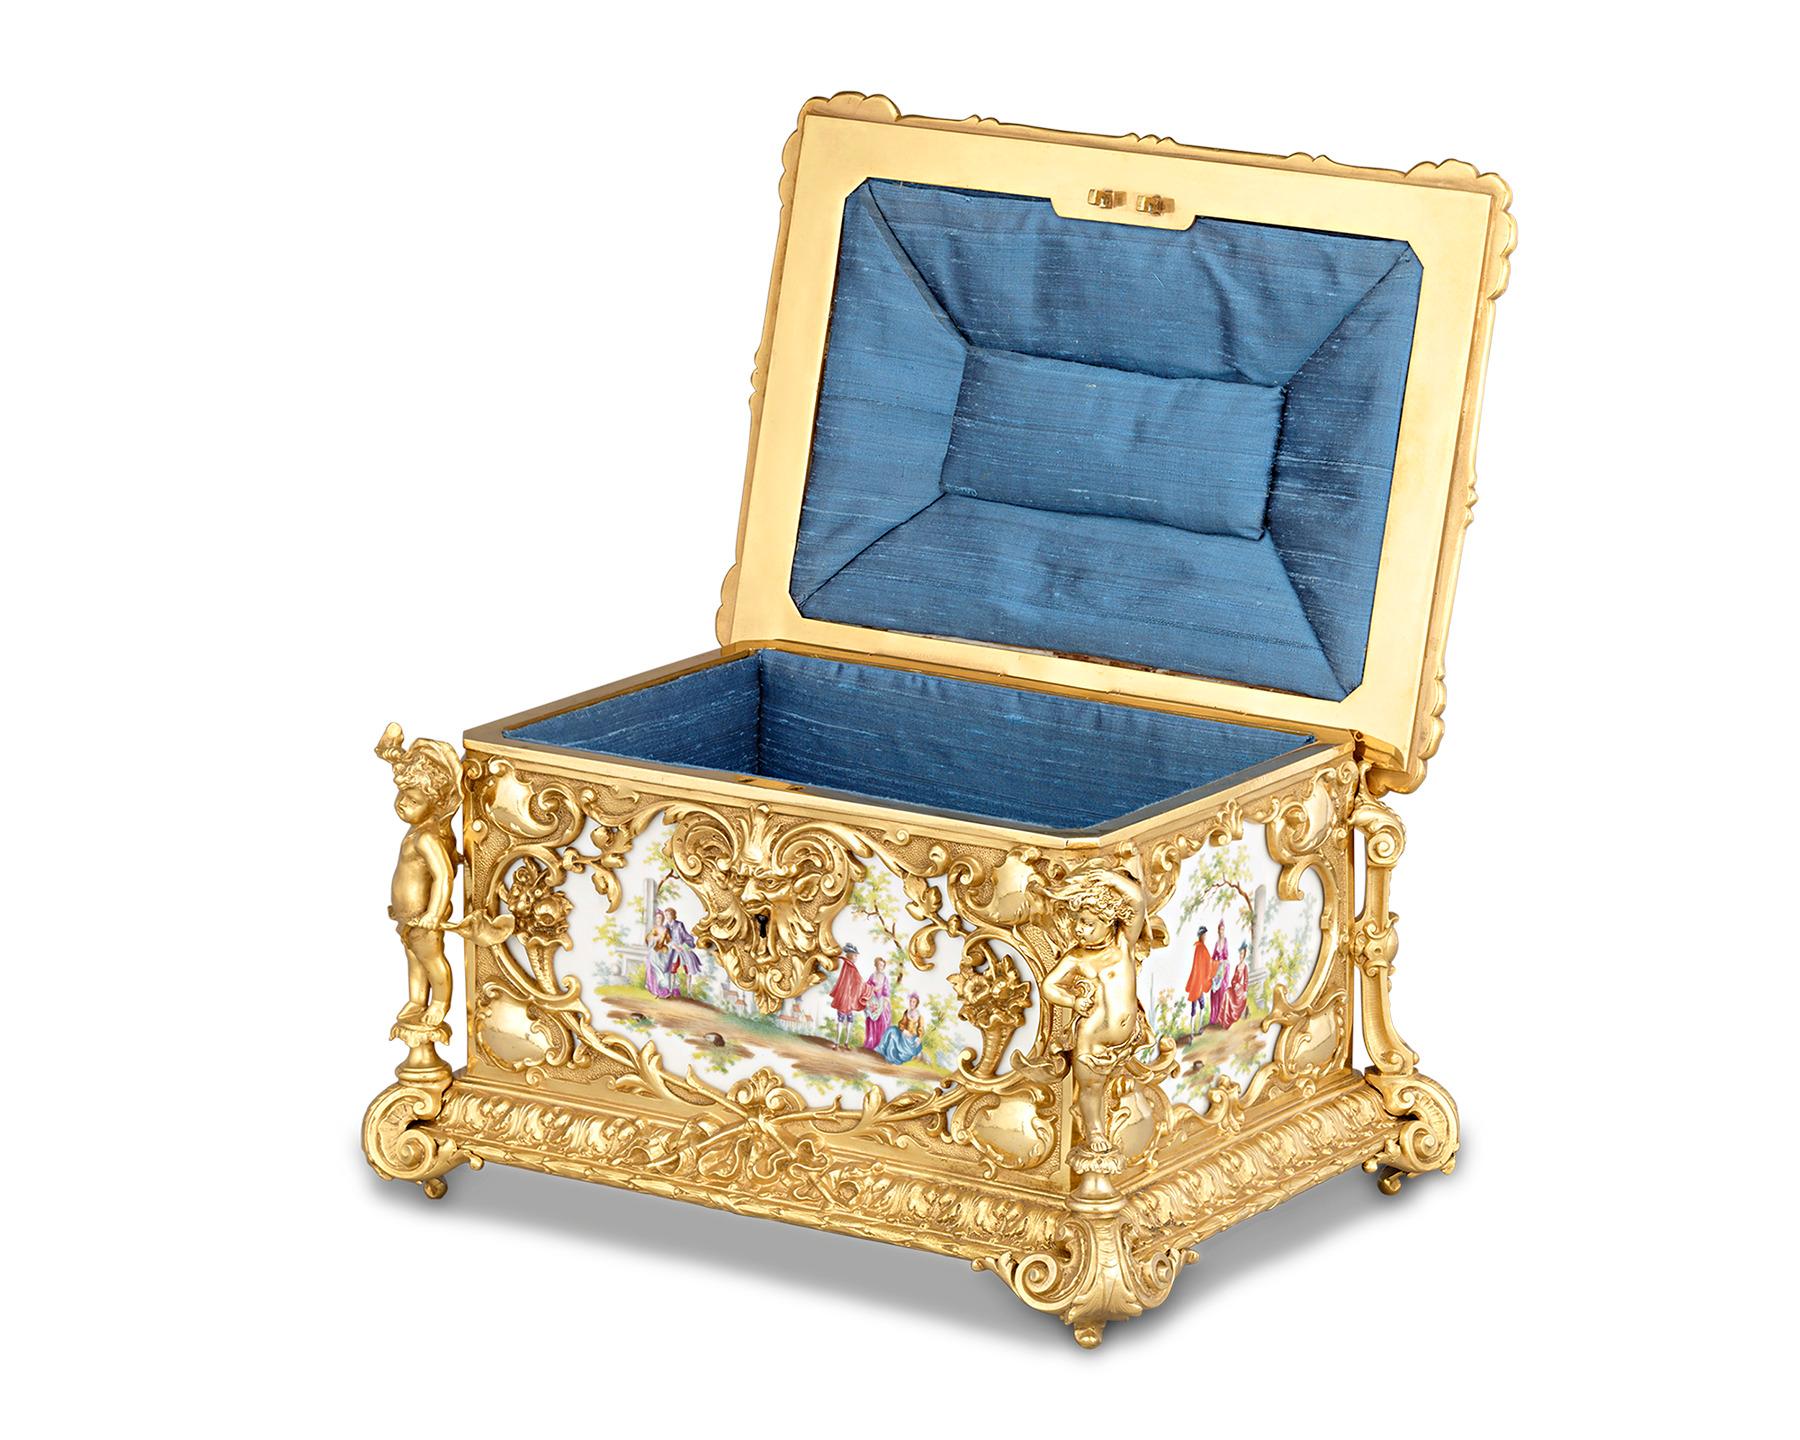 Meissen-styled European porcelain is framed by doré bronze of magnificent artistry in this delightful casket. The bronze is brilliantly detailed with rocaille flourishes and charming putti that frame beautifully hand-painted porcelain plaques on all